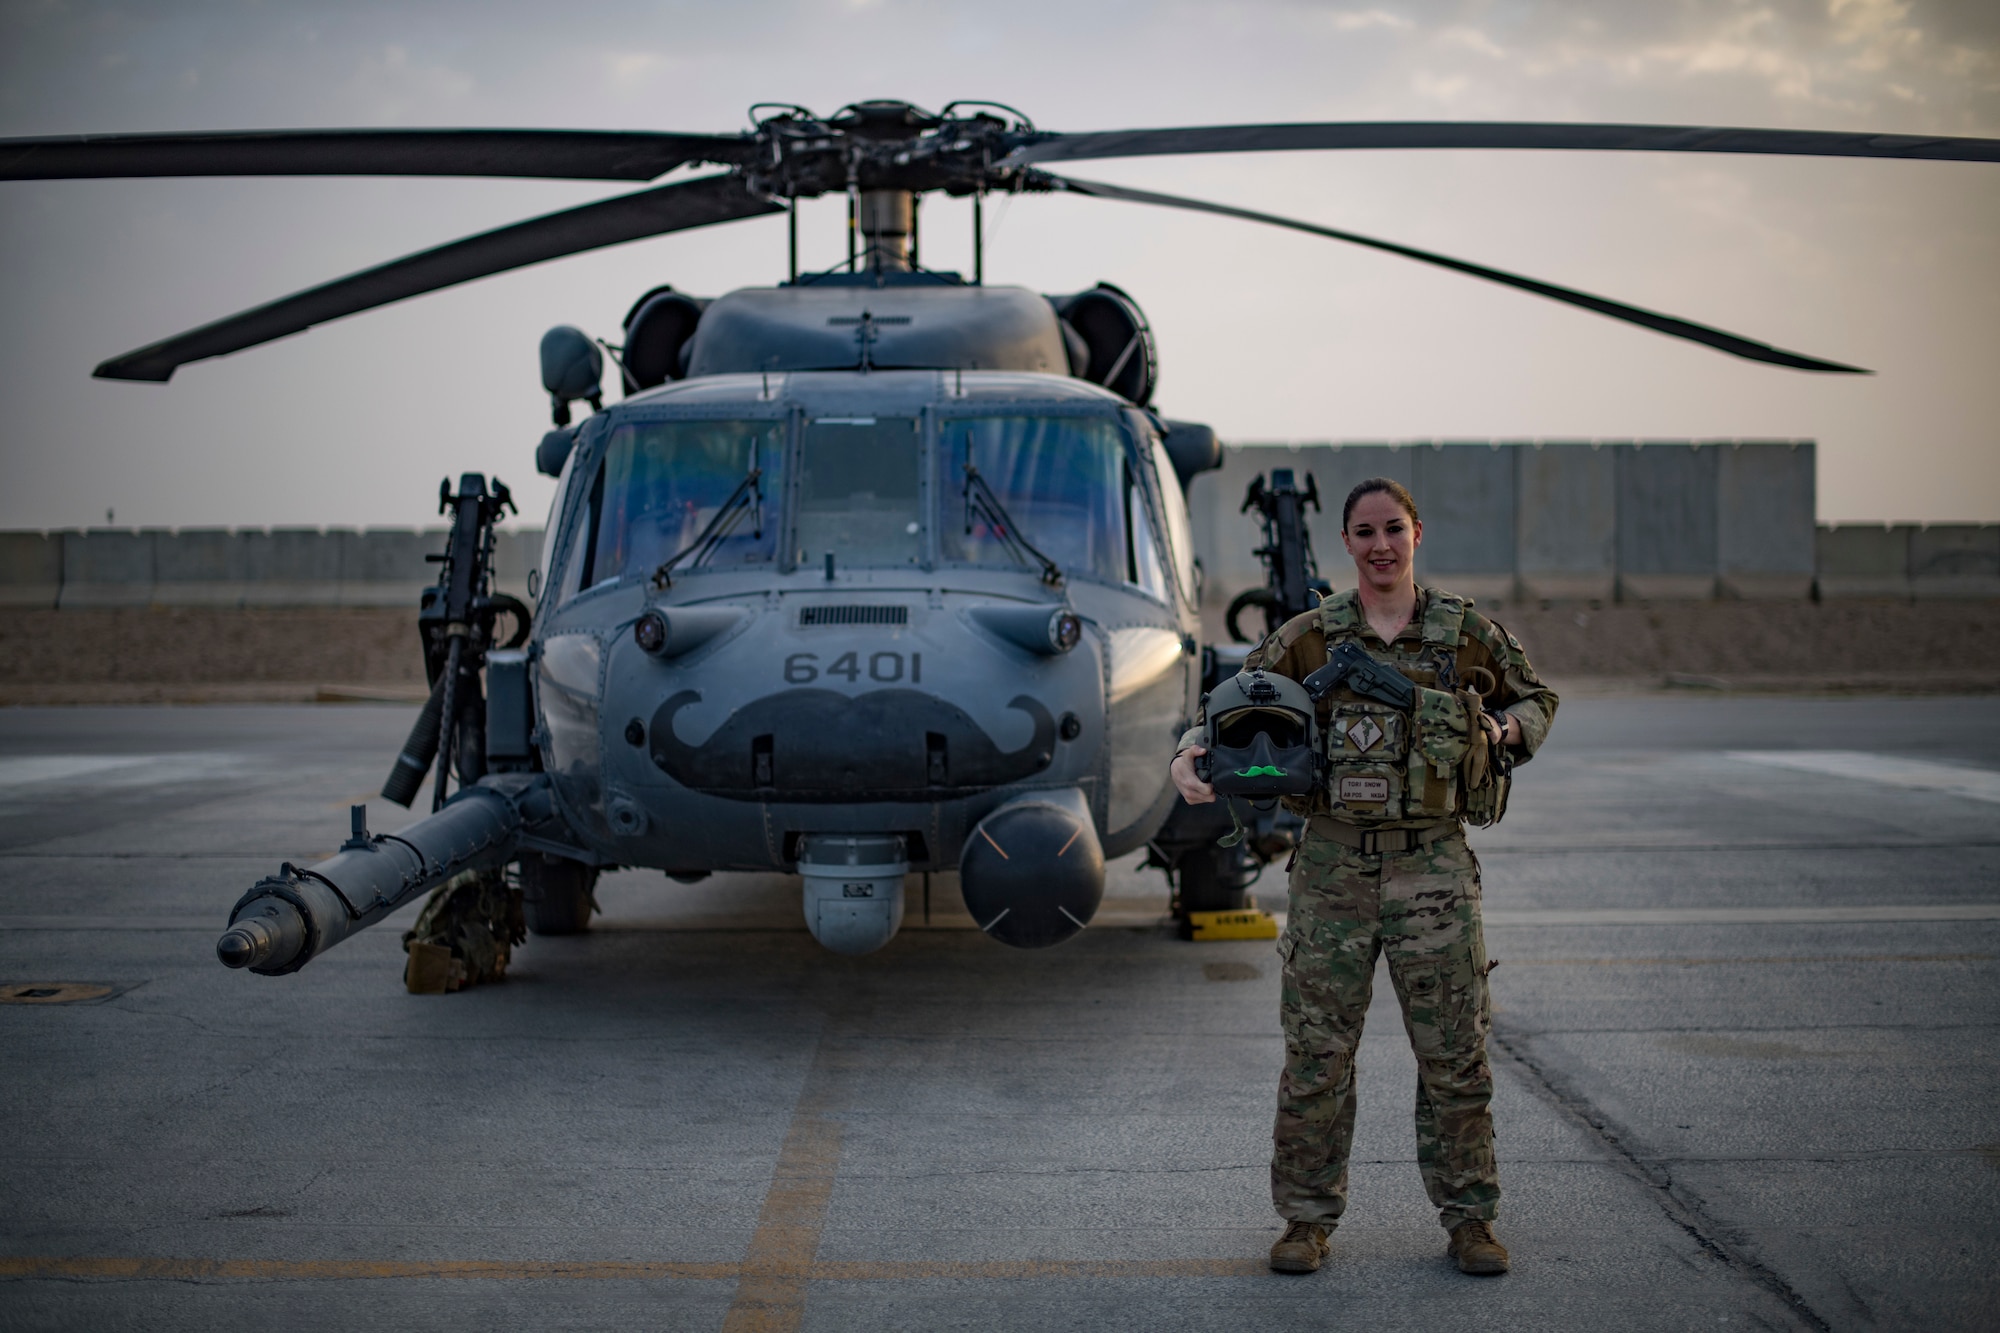 U.S. Air Force Capt. Victoria Snow, HH-60G Pave Hawk pilot, assigned to the 33rd Expeditionary Rescue Squadron, stands in front of her aircraft before a training mission with a Guardian Angel team assigned to the 308th ERQS, Kandahar Airfield, Afghanistan, in support of Operation Freedom’s Sentinel and the NATO Resolute Support mission, March 13, 2018.